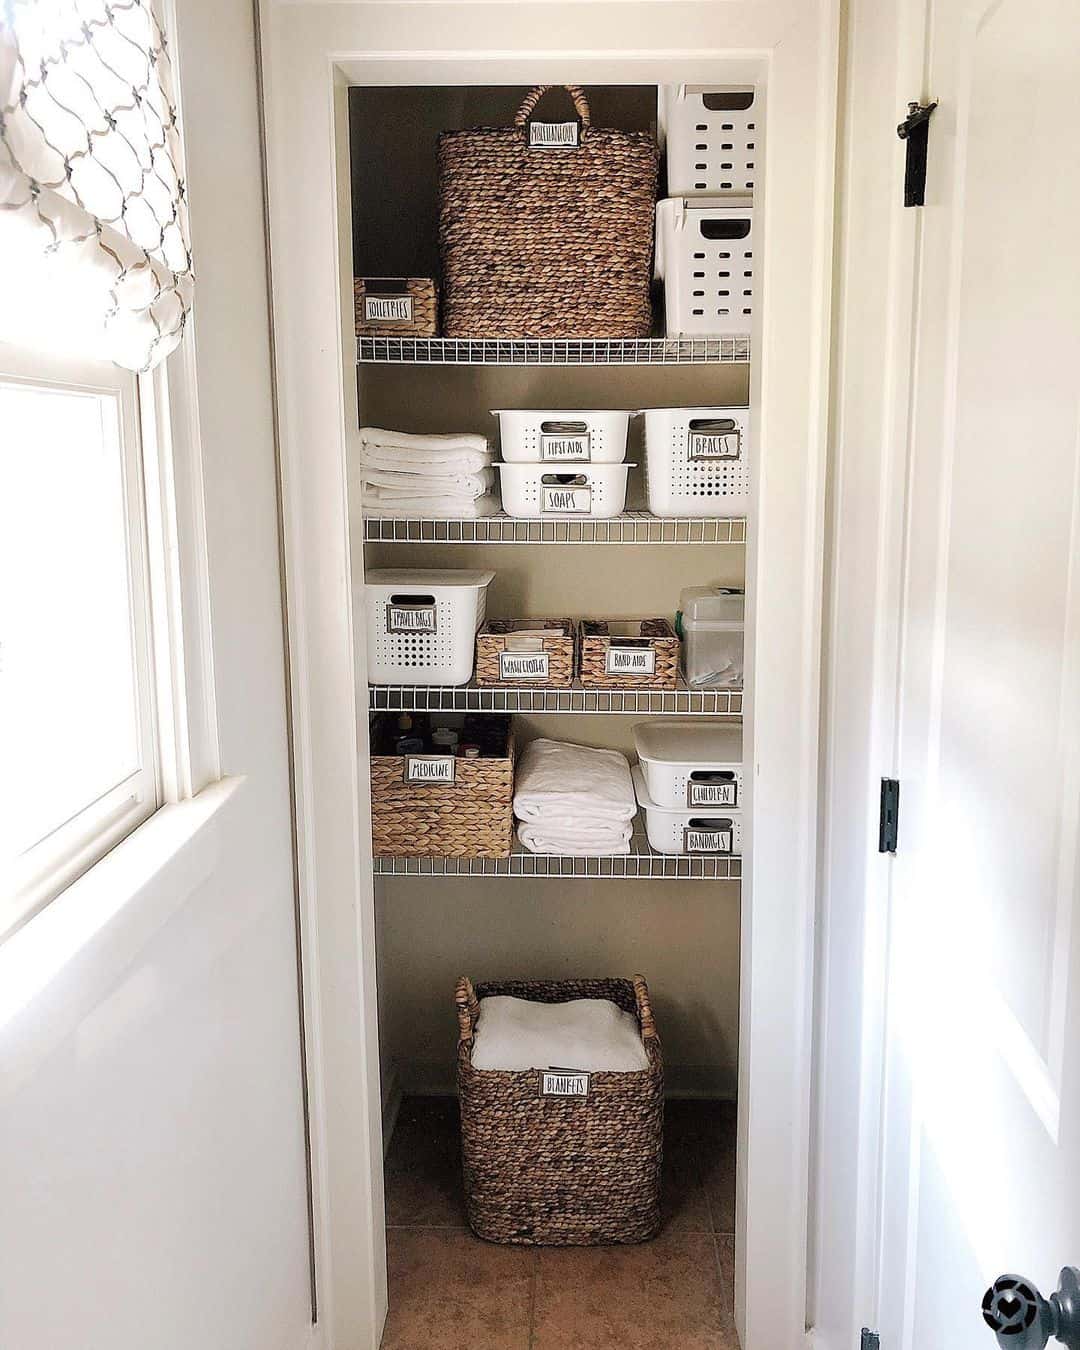 35 Small Bathroom Storage Ideas to Conceal & Organize Clutter